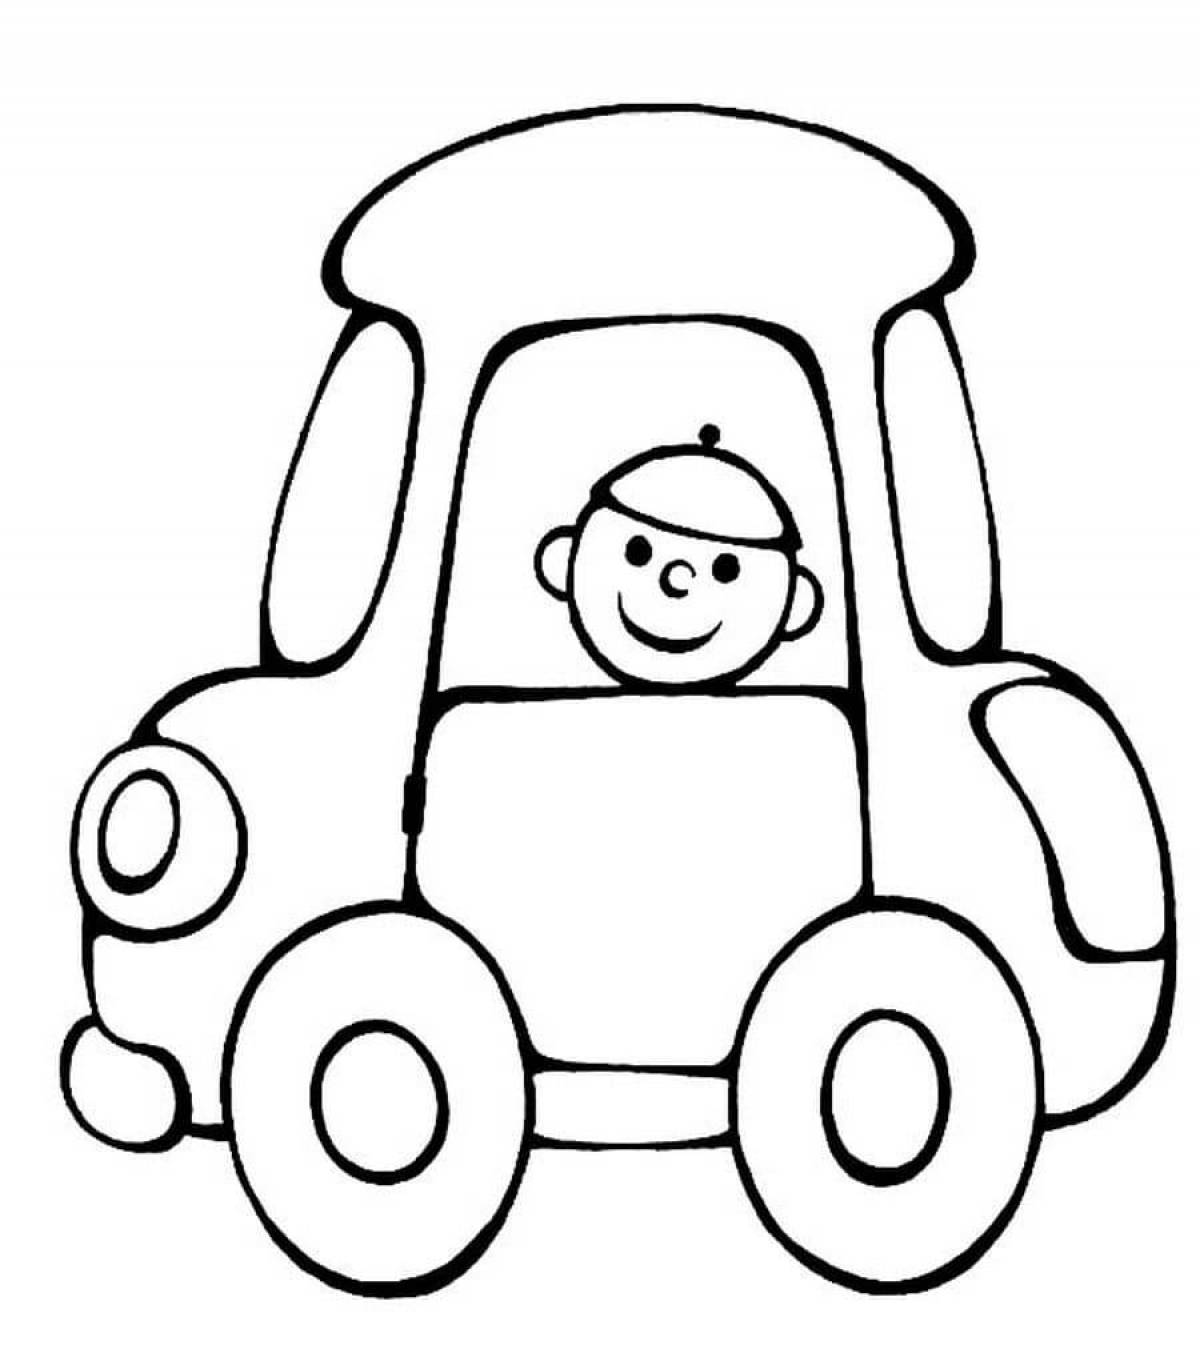 Coloring pages with adorable cars for toddlers 2-3 years old